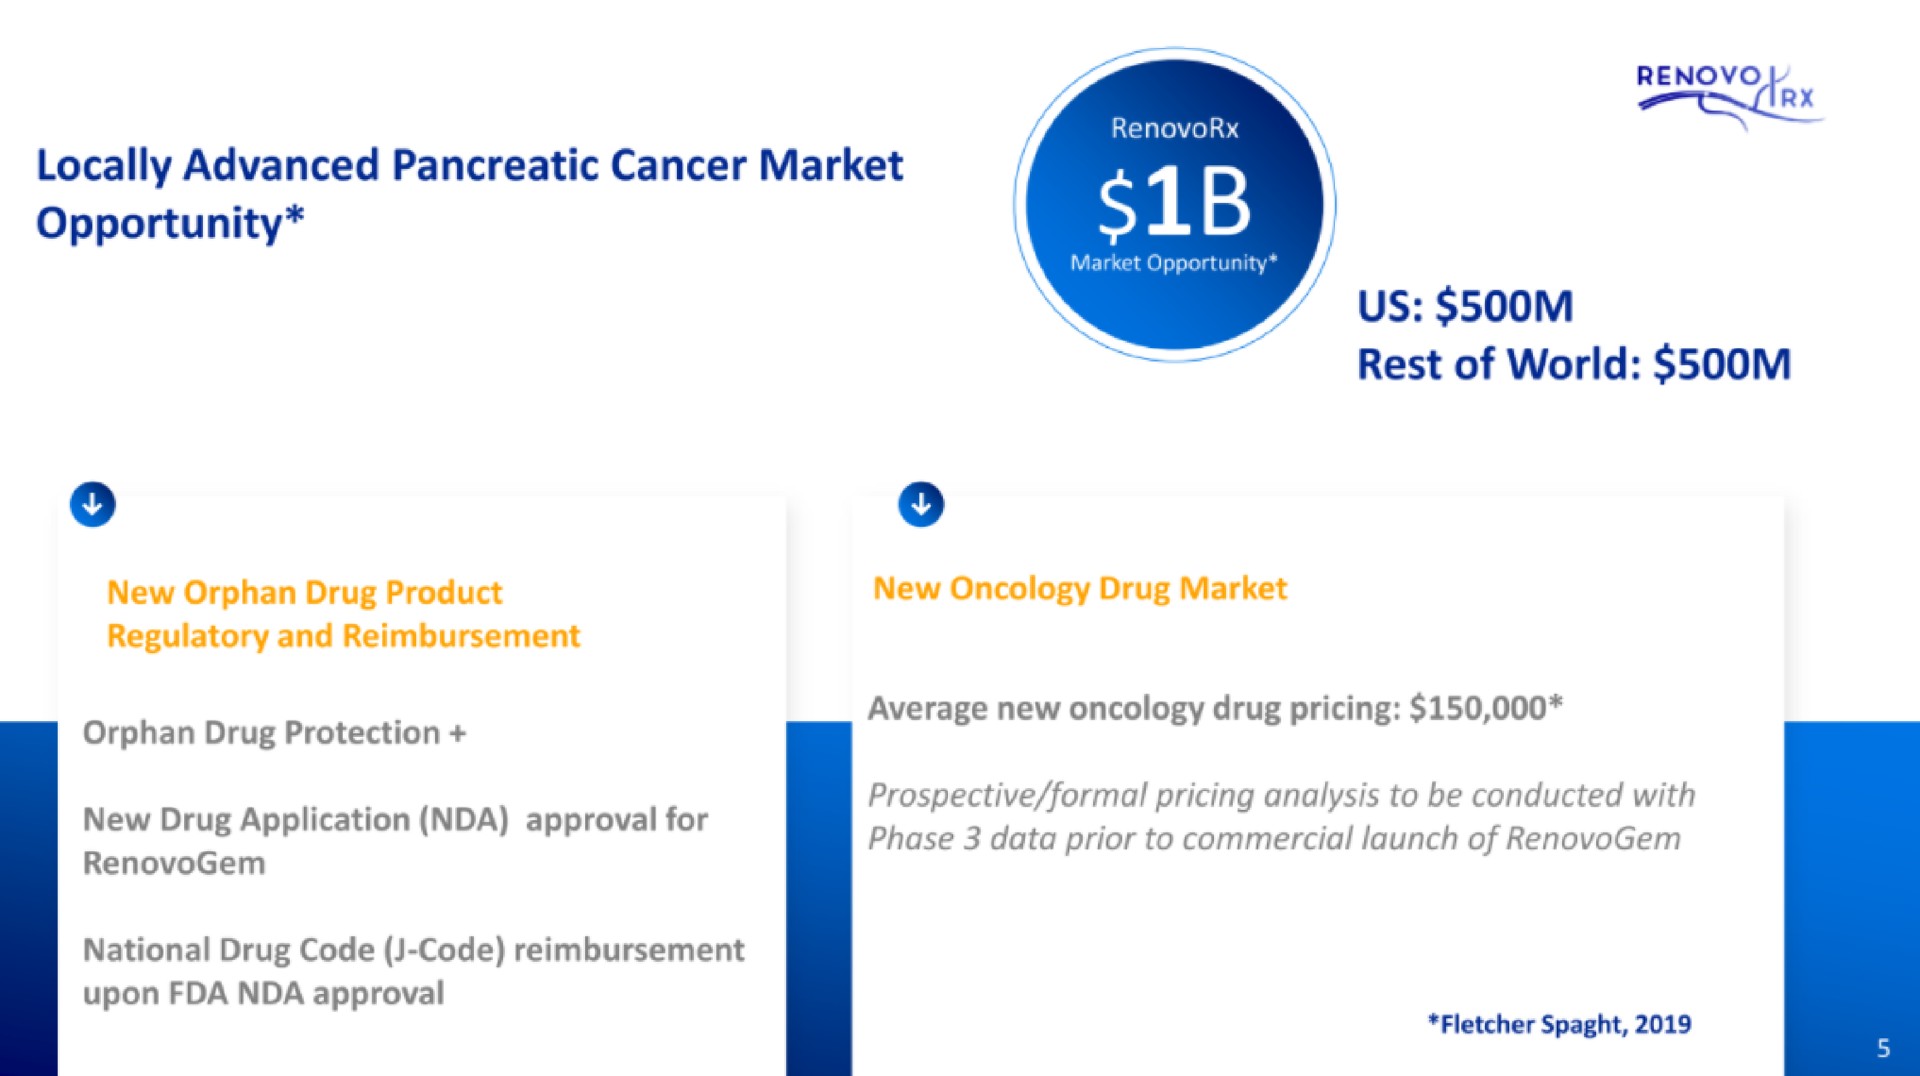 locally advanced pancreatic cancer market opportunity i us rest of world | RenovoRx